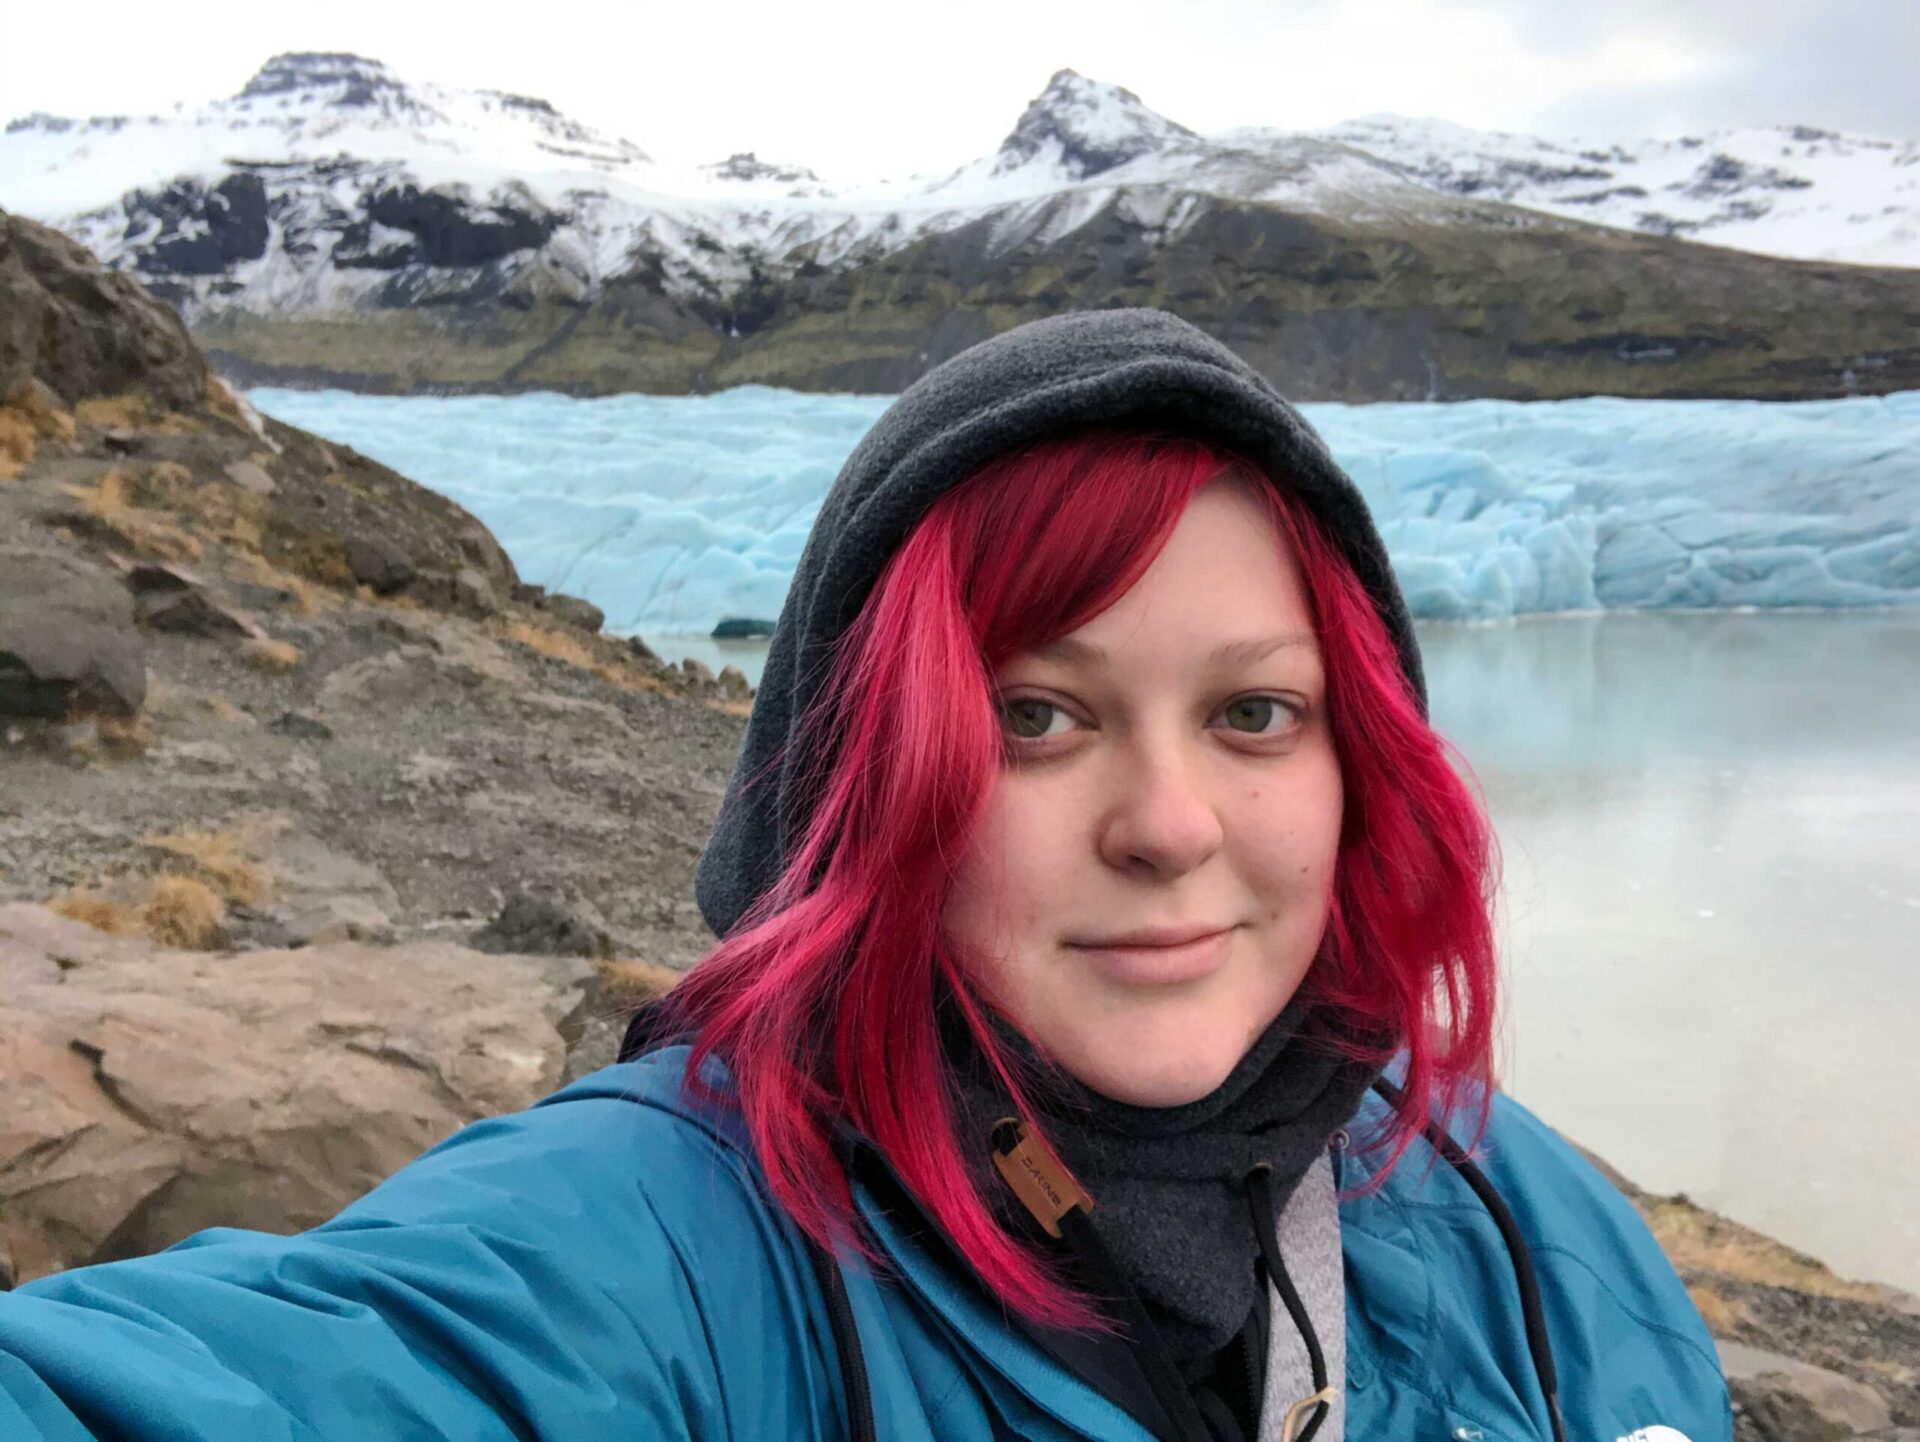 This is me in front of Skaftafell Glacier in Iceland, taken in 2019.